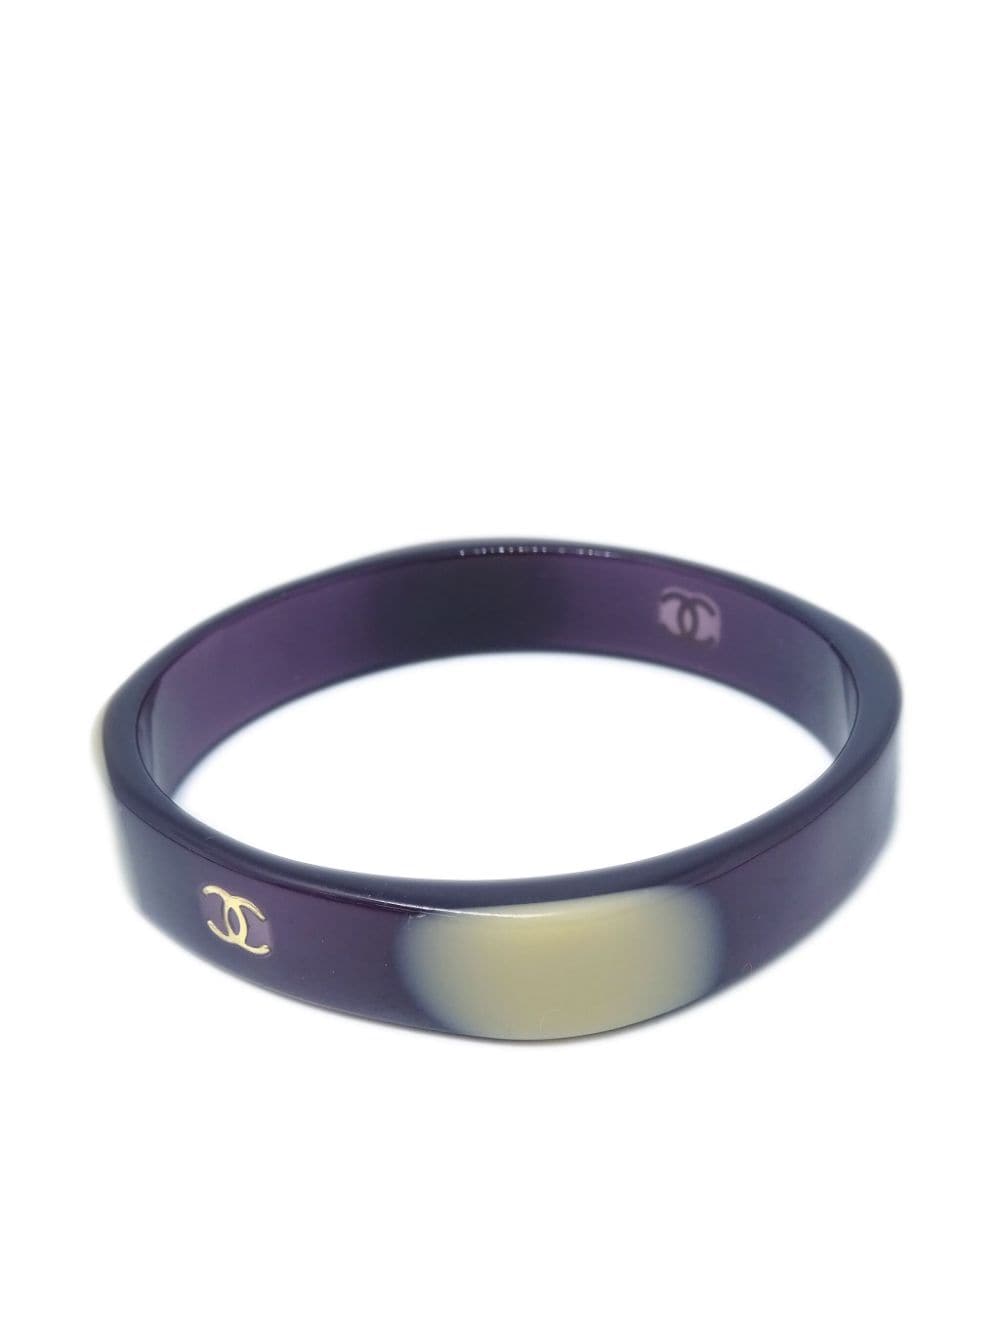 Pre-owned Chanel 2001 Cc-stamp Square Bangle In Purple